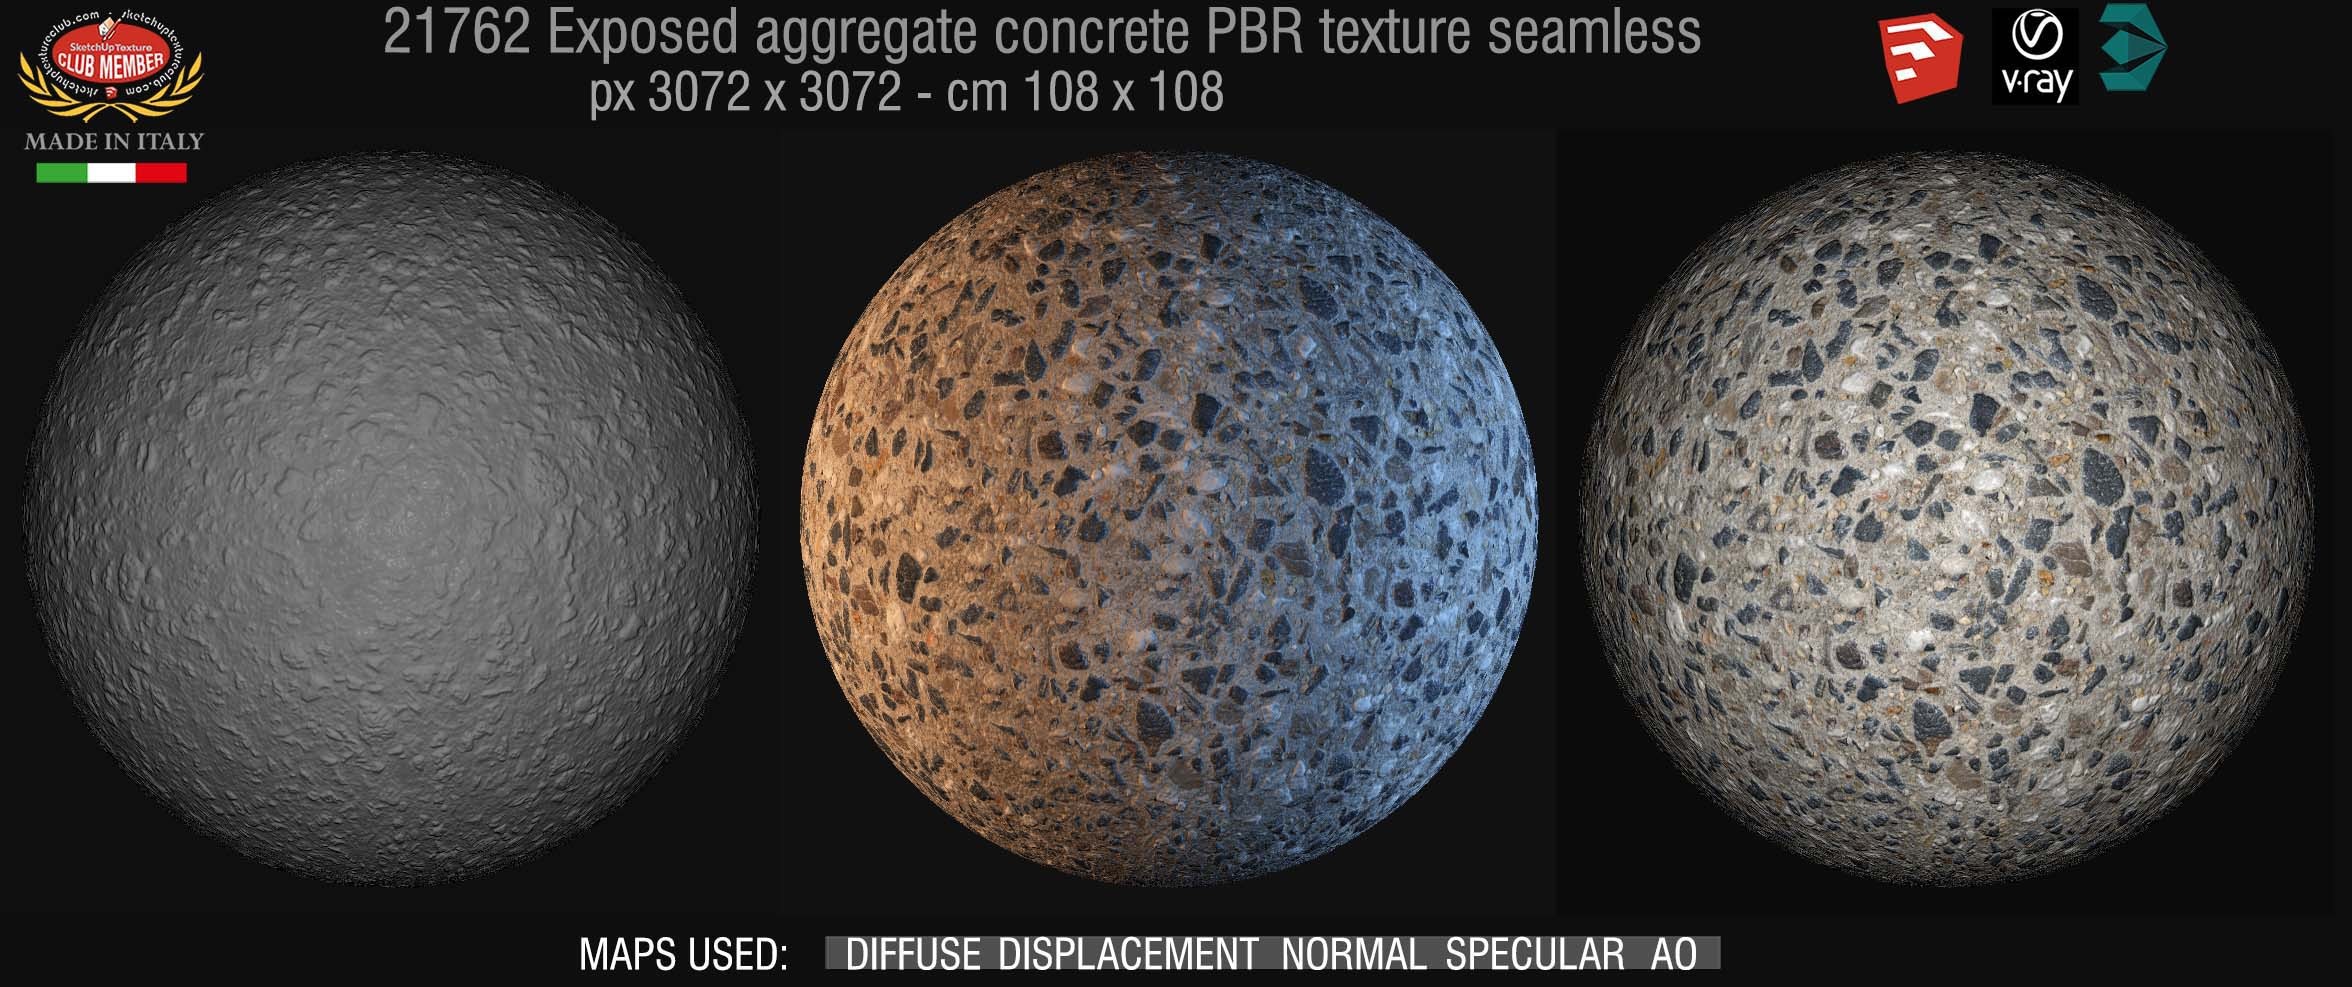 21762 Exposed aggregate concrete PBR textures seamless demo